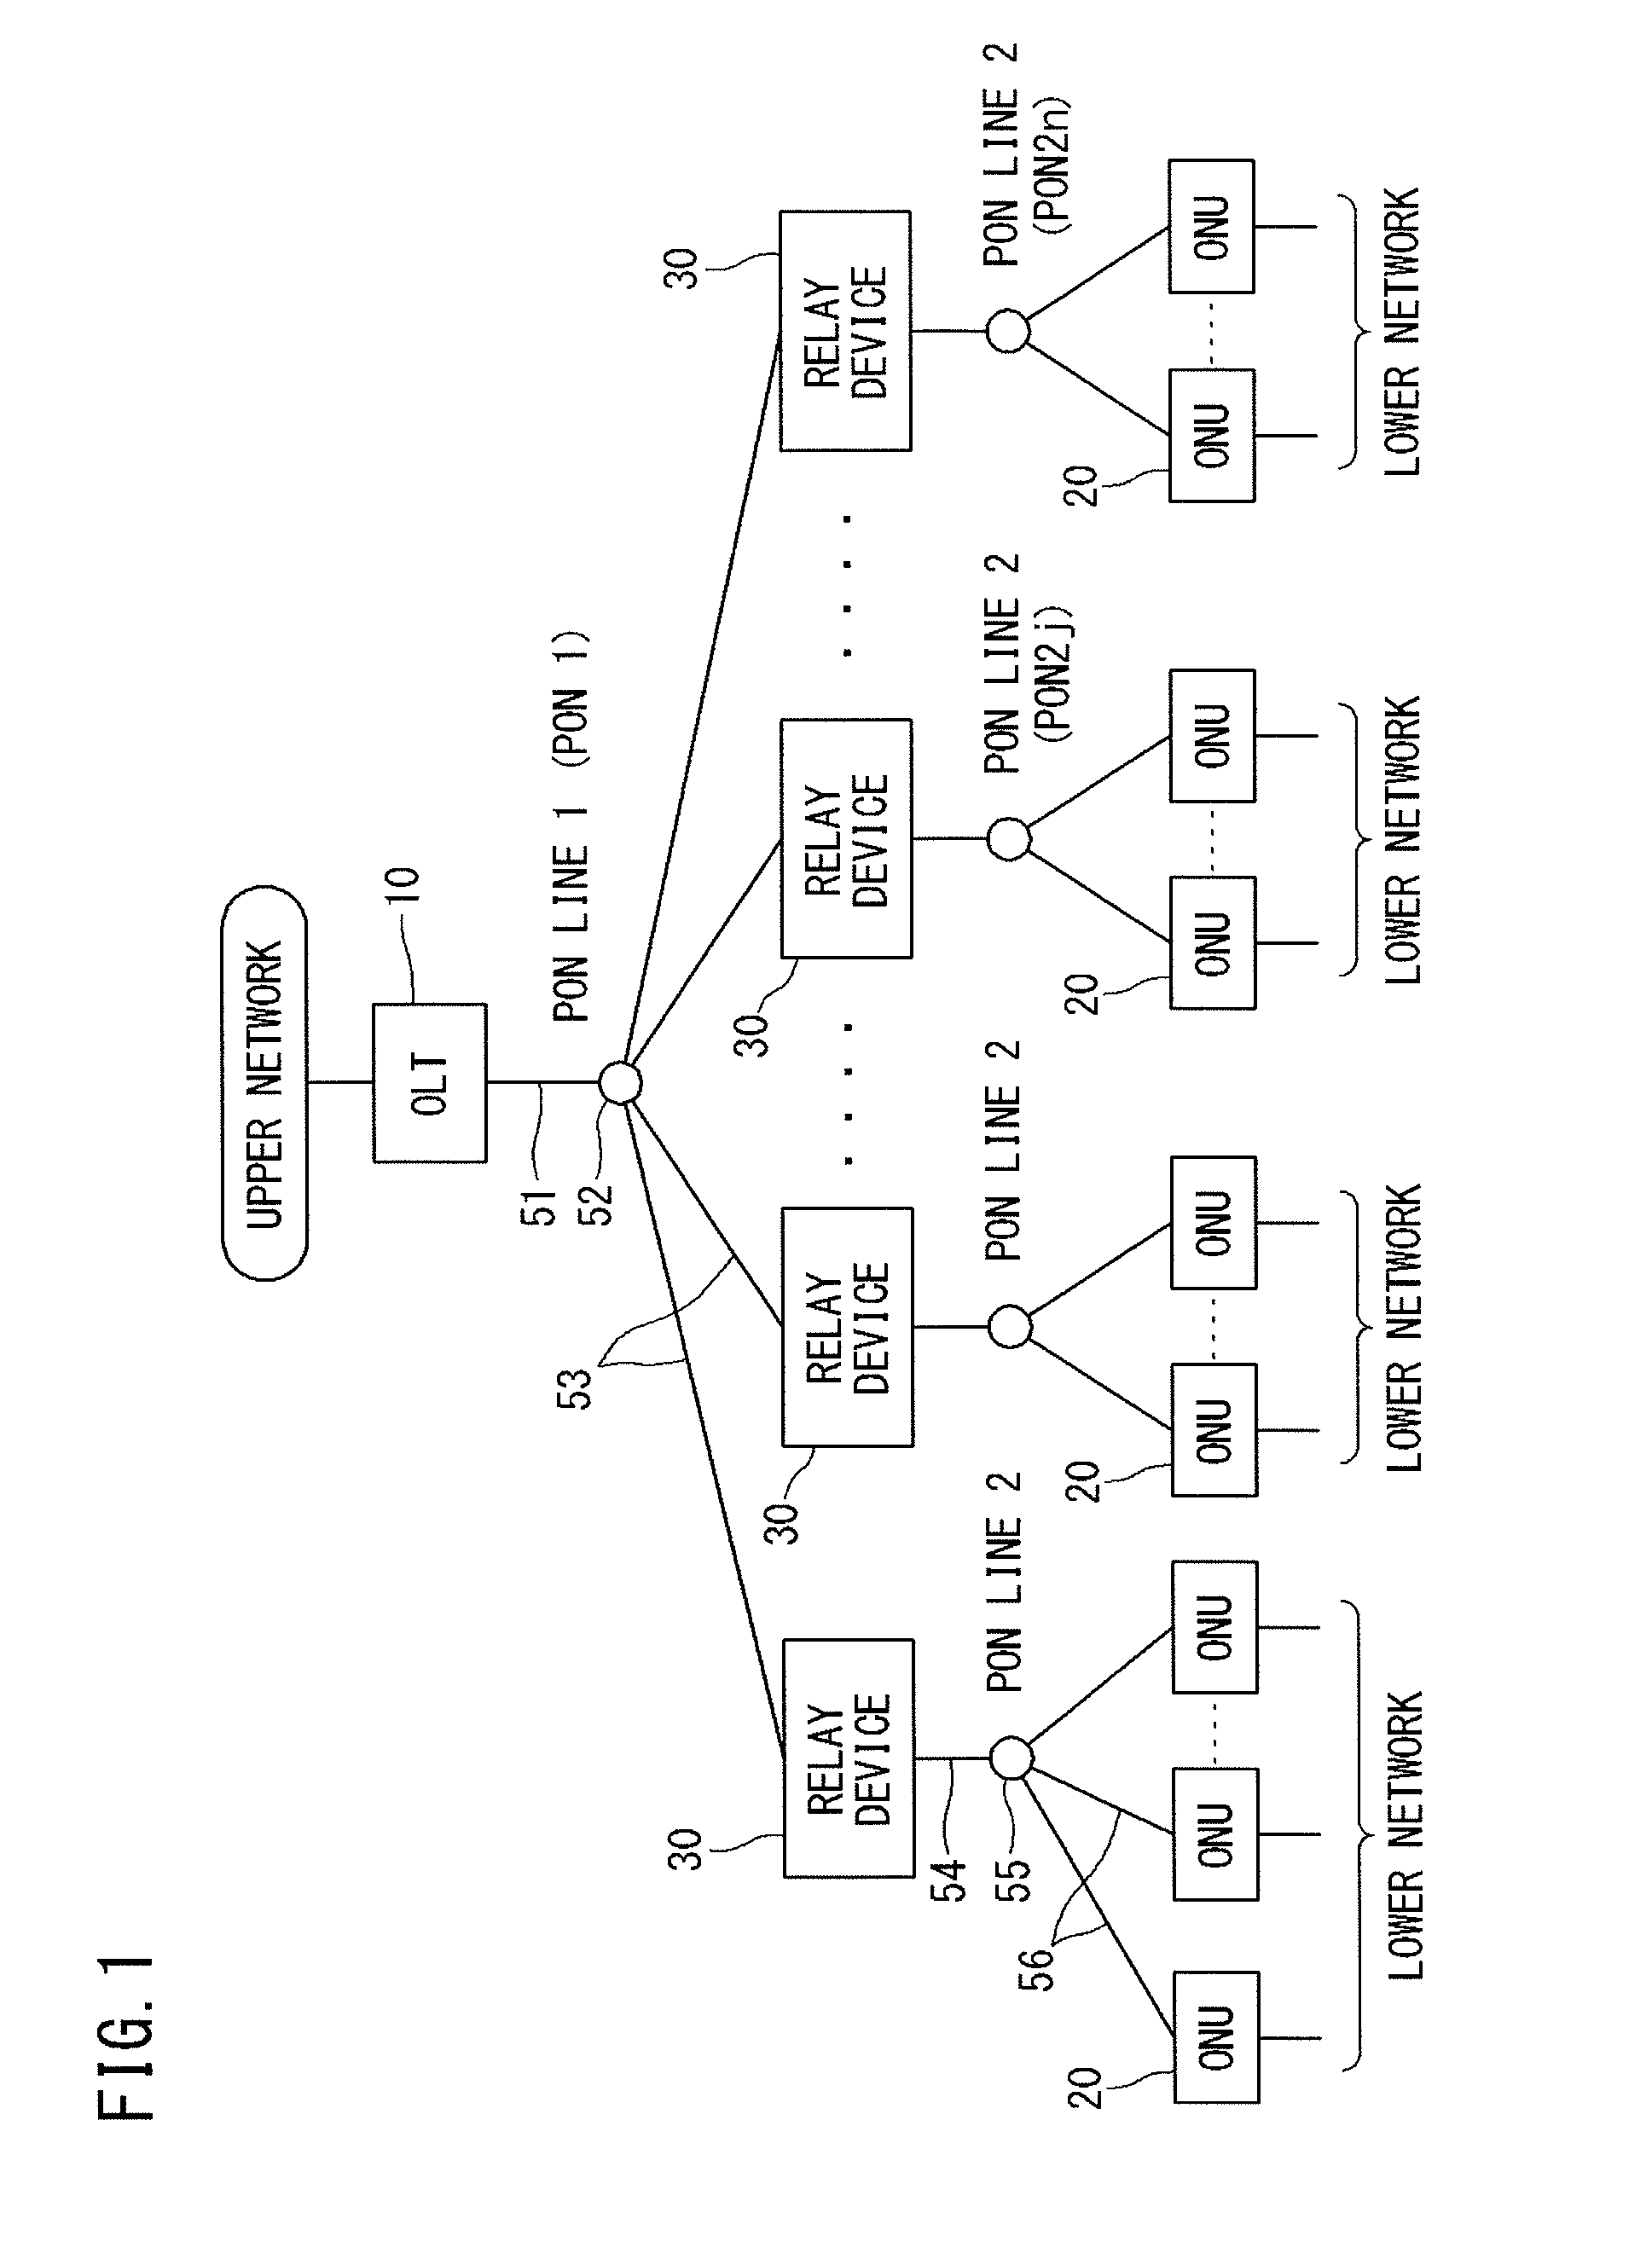 Relay device, relay method, and optical communication system which uses relay device